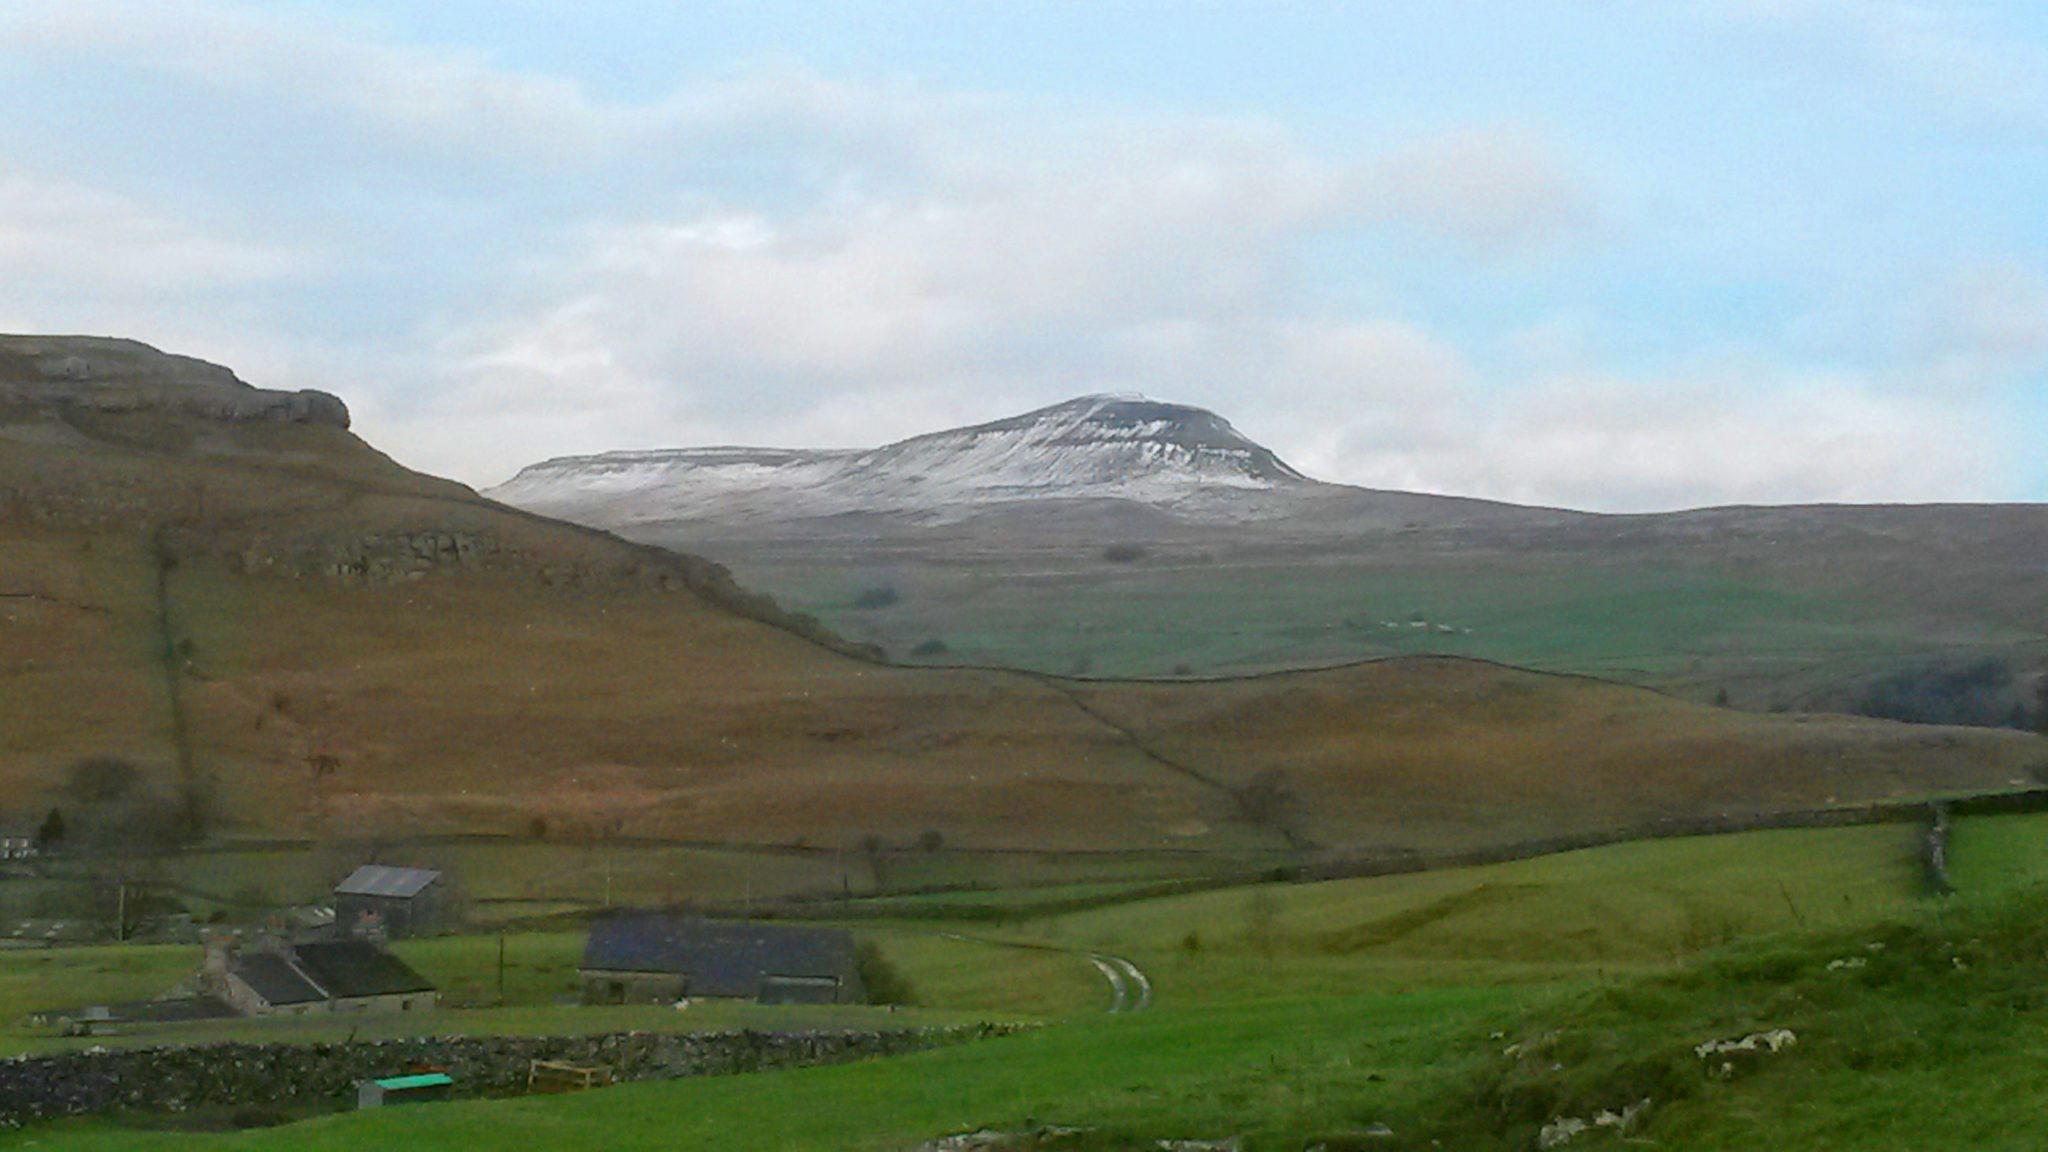 The iconic hill Penyghent, in the Yorkshire Dales. Photo: Tony Brocklebank